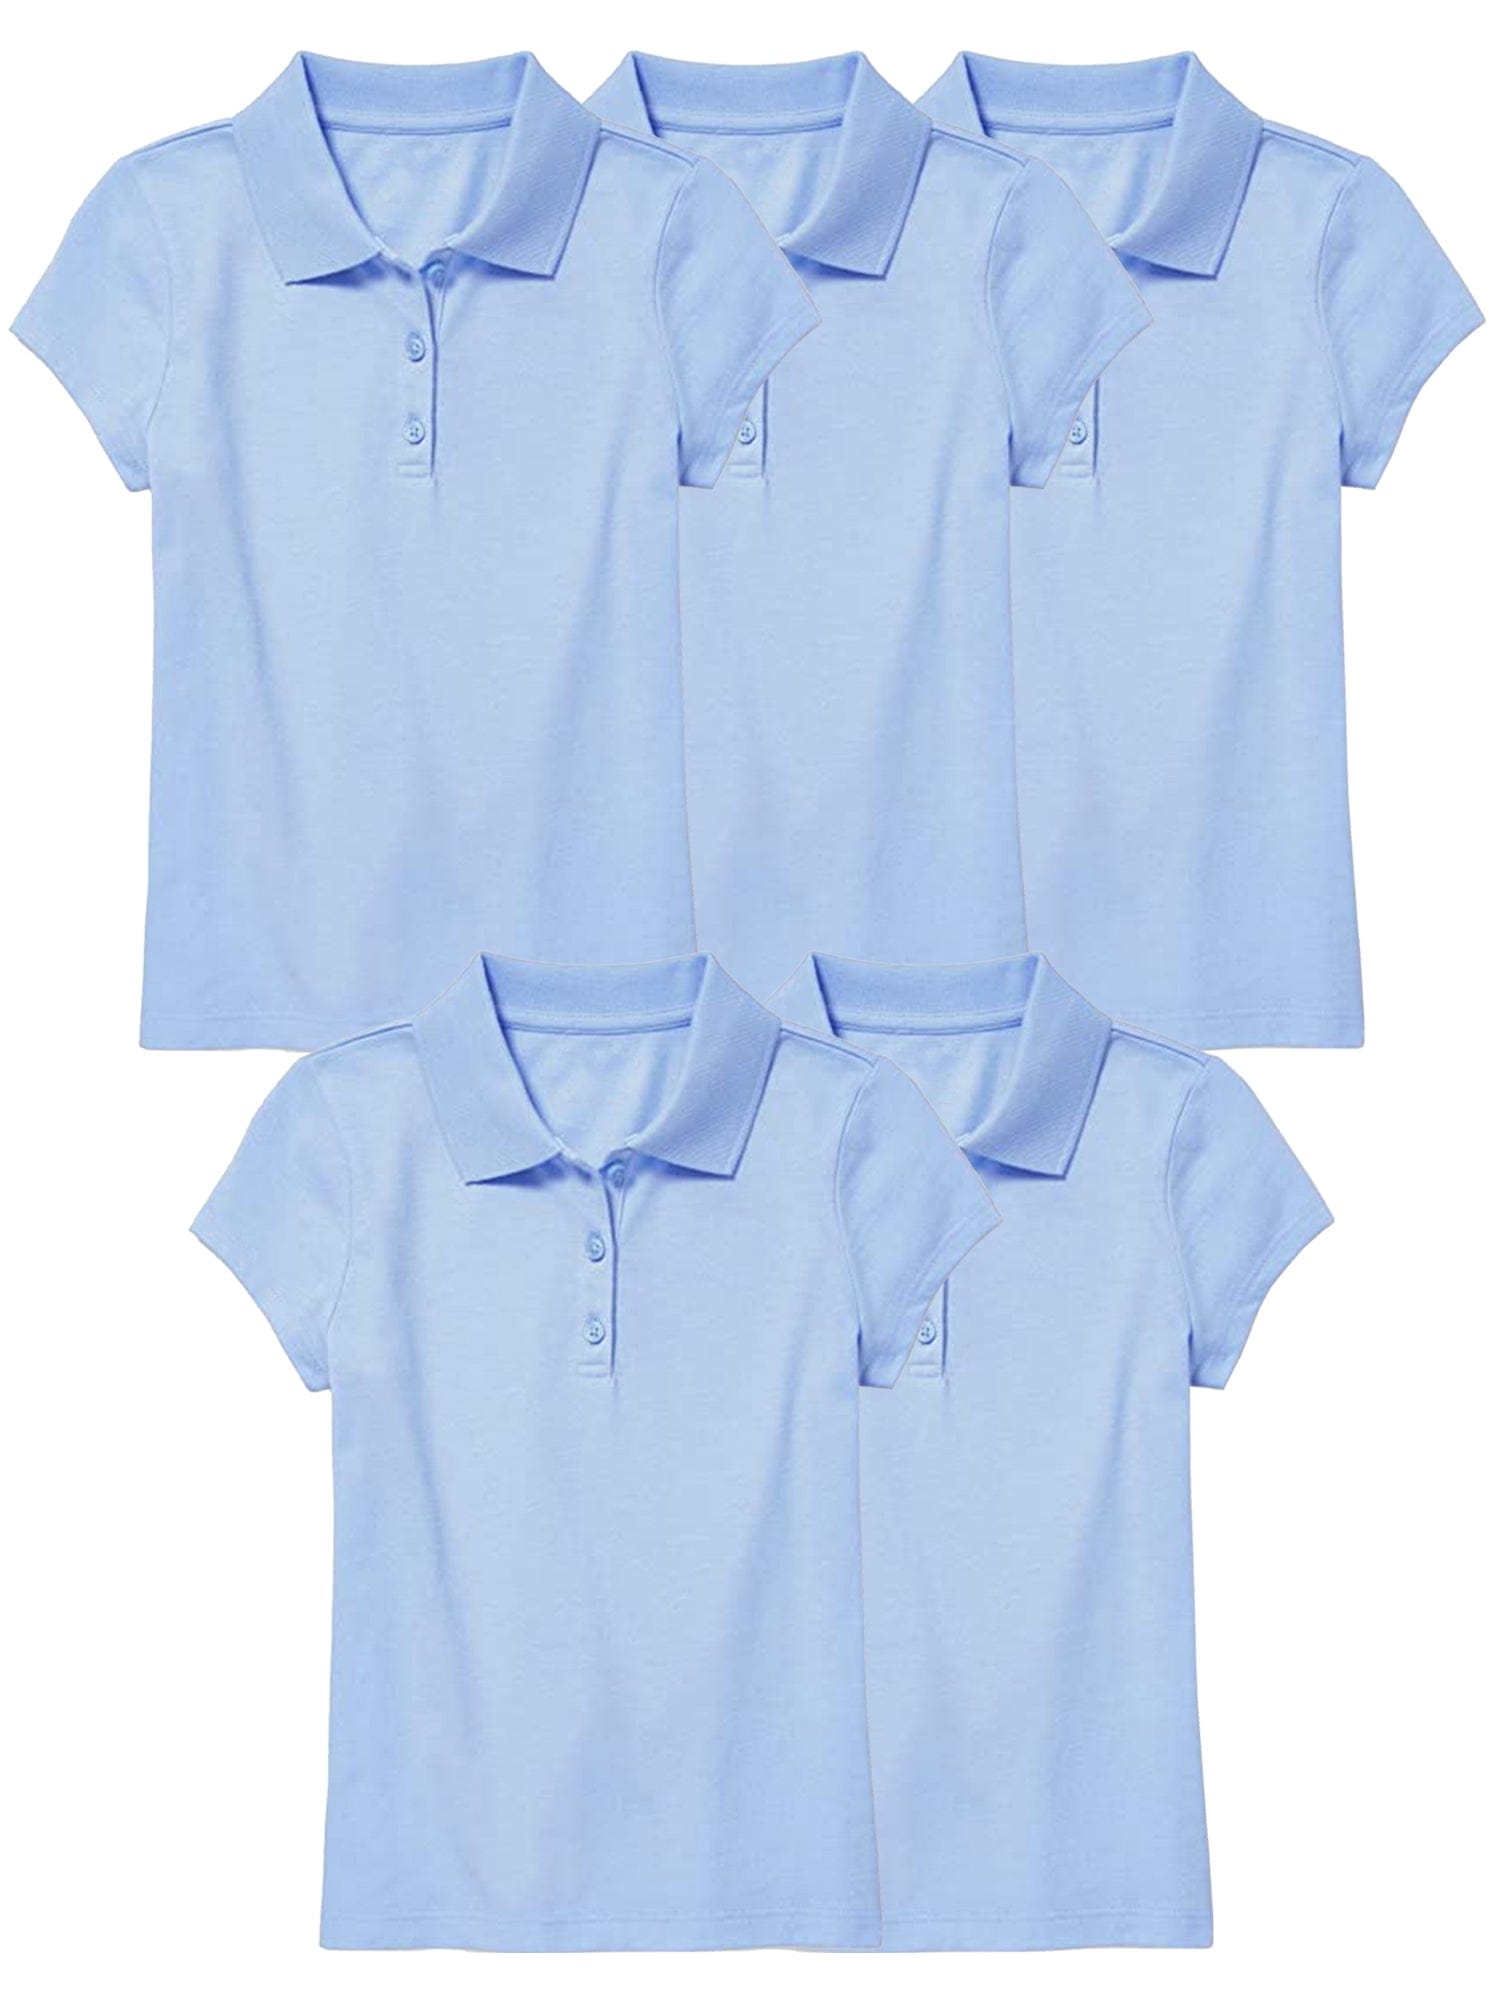 Girl's (5-PACK) Short Sleeve Polo Shirt (Sizes S-2X) - GalaxybyHarvic